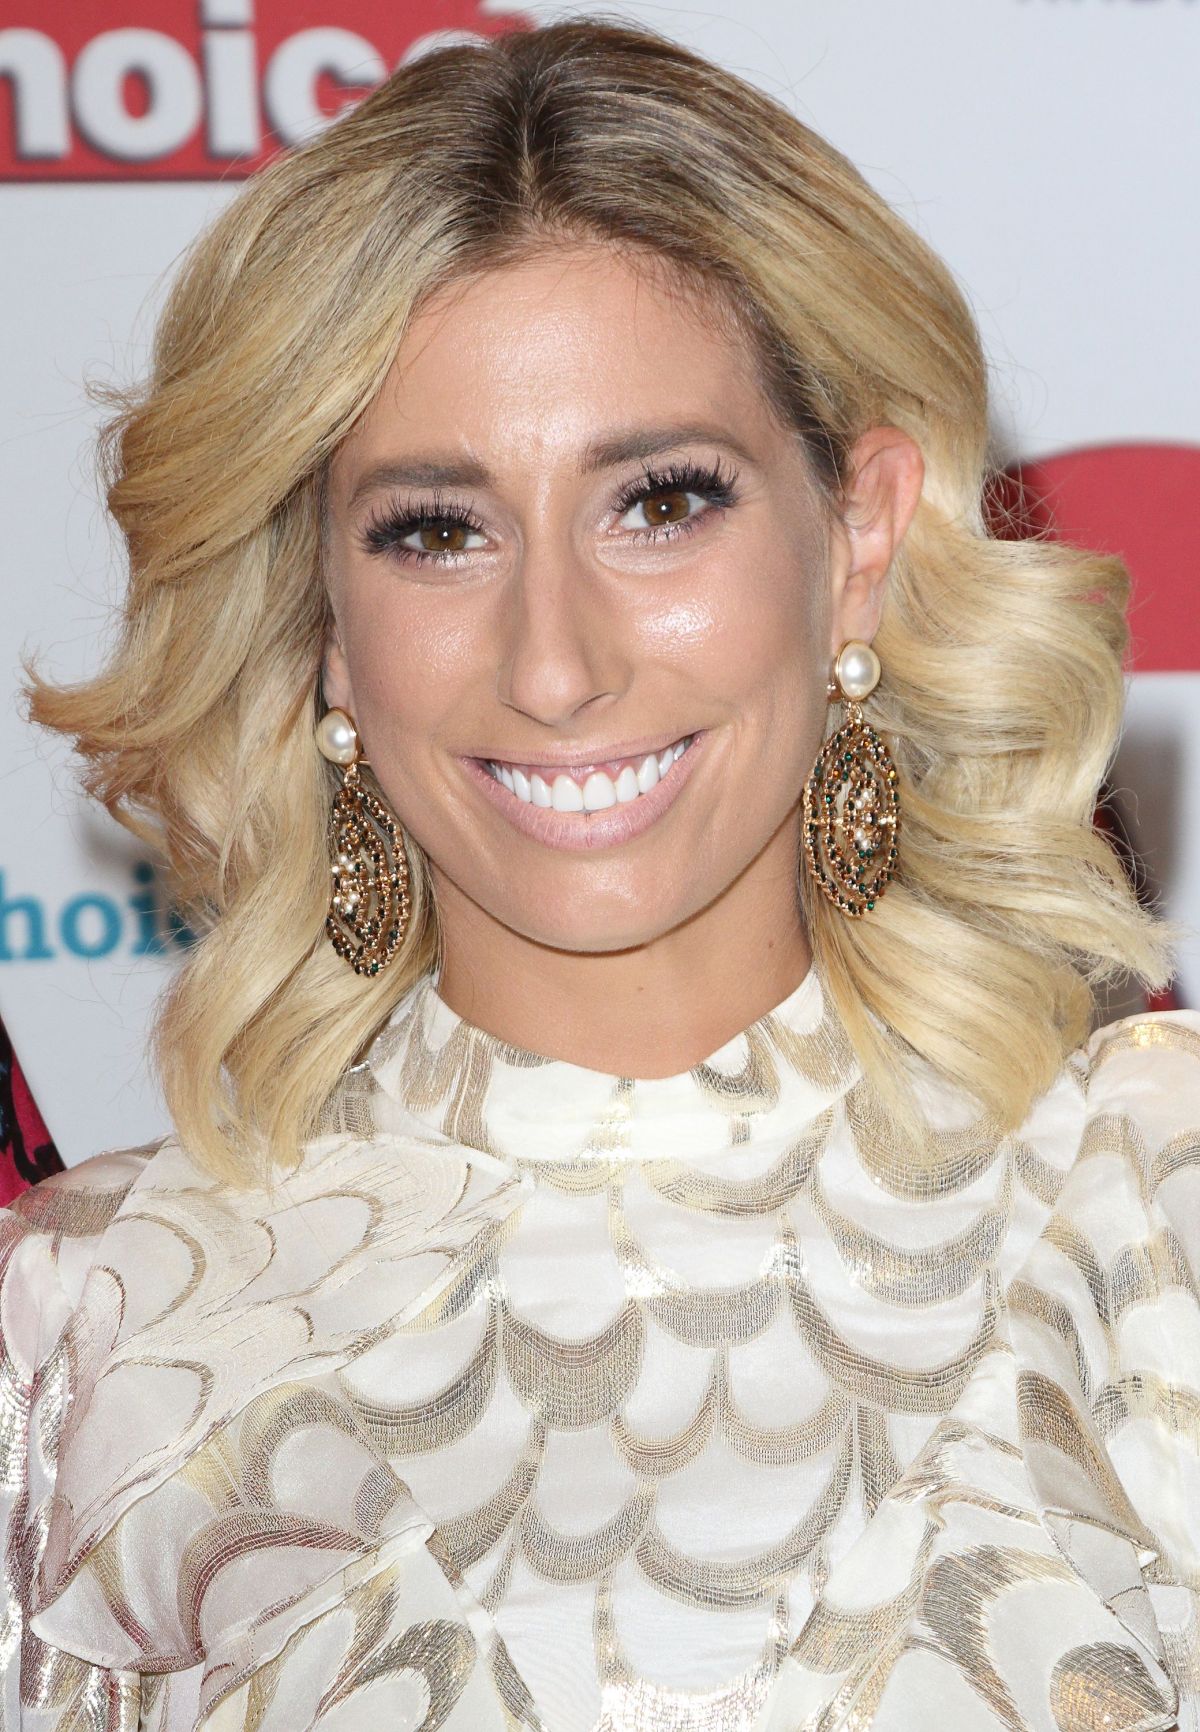 STACEY SOLOMON at TV Choice Awards in London 09/04/2017 ...